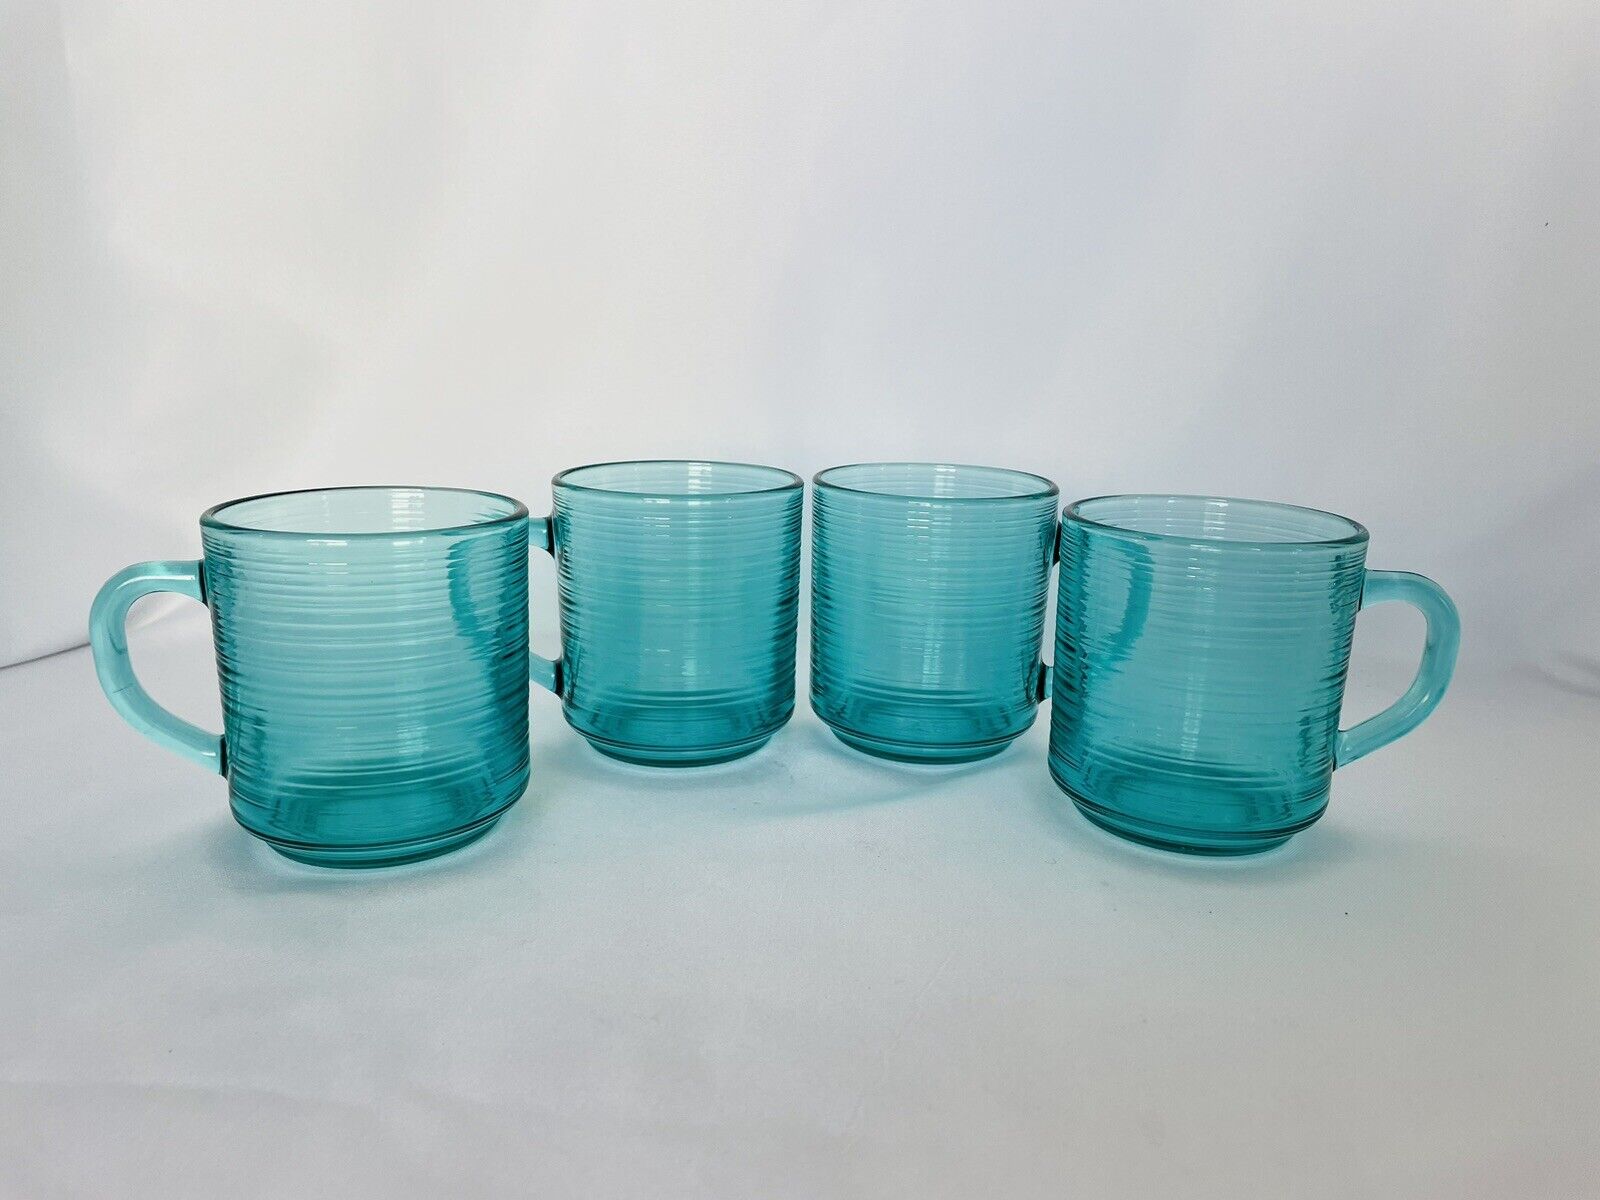 VTG MCM Arcoroc Turquoise Teal Blue Glass France Jardiniere Rings Mugs Cups x4